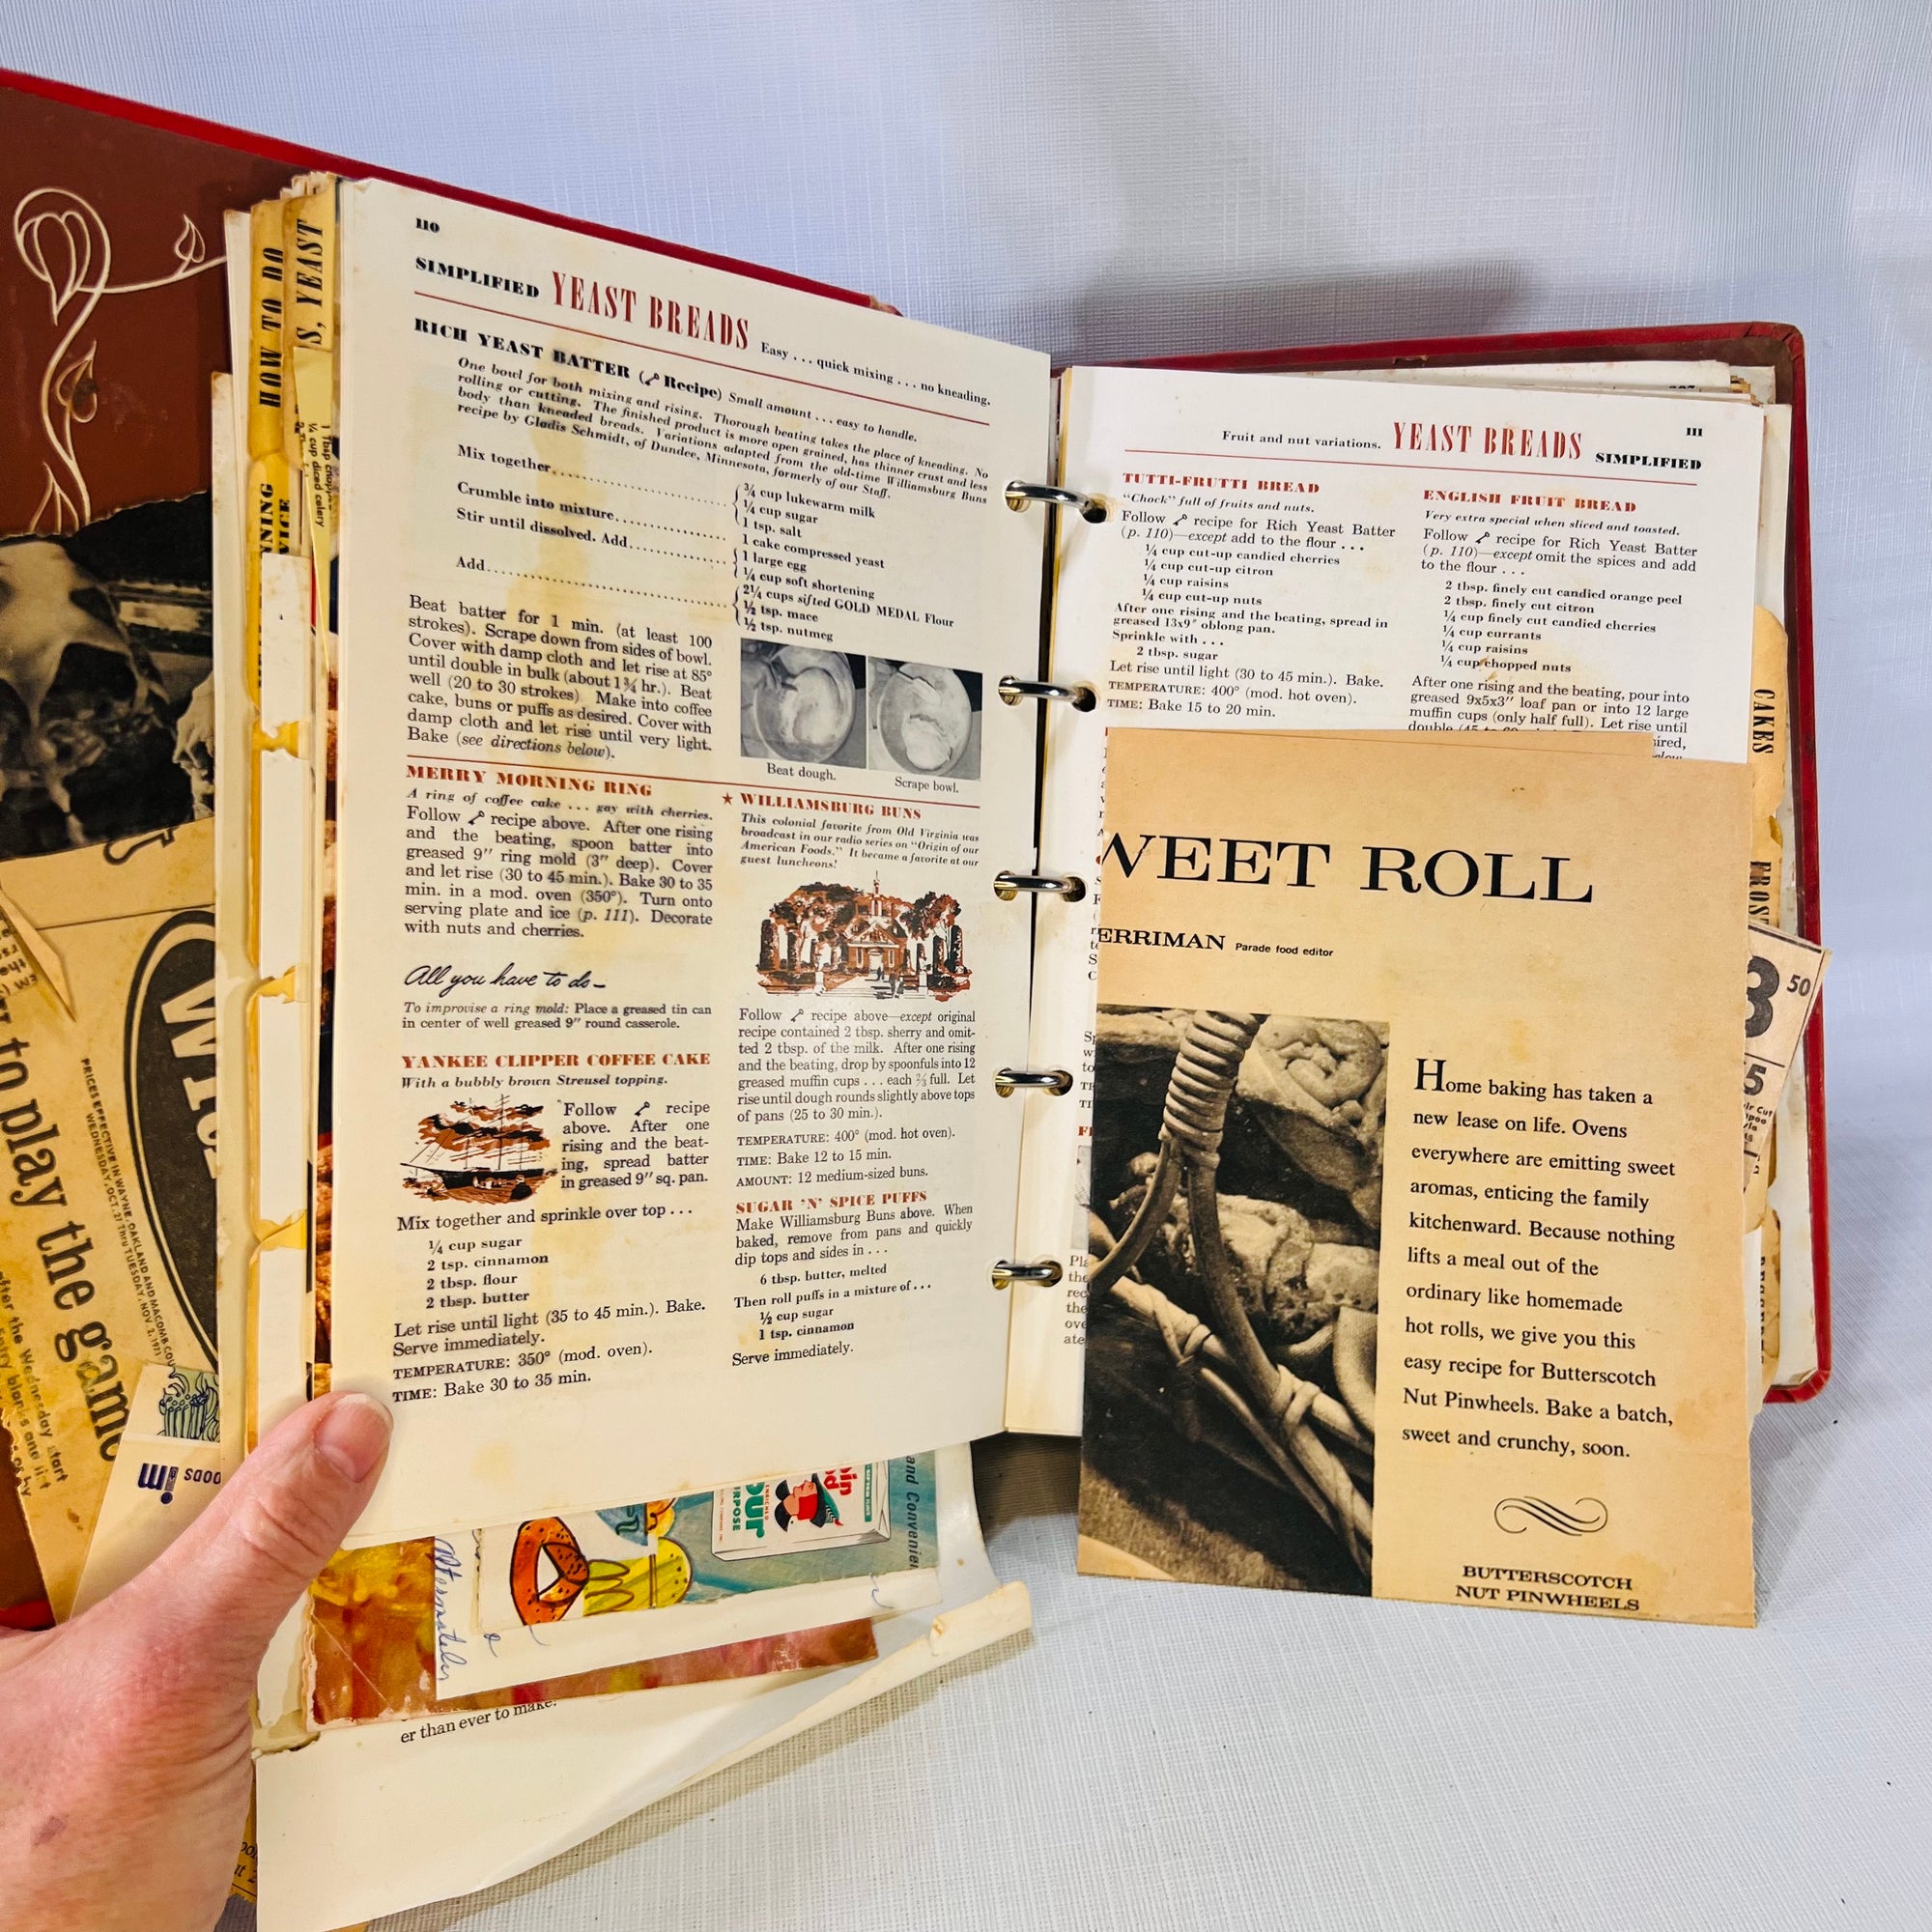 Betty Crocker's Picture Book 5 Ring Binder 1950's McGraw-Hill Book Company Not Complete But Full of Handwritten, Newspaper Recipes